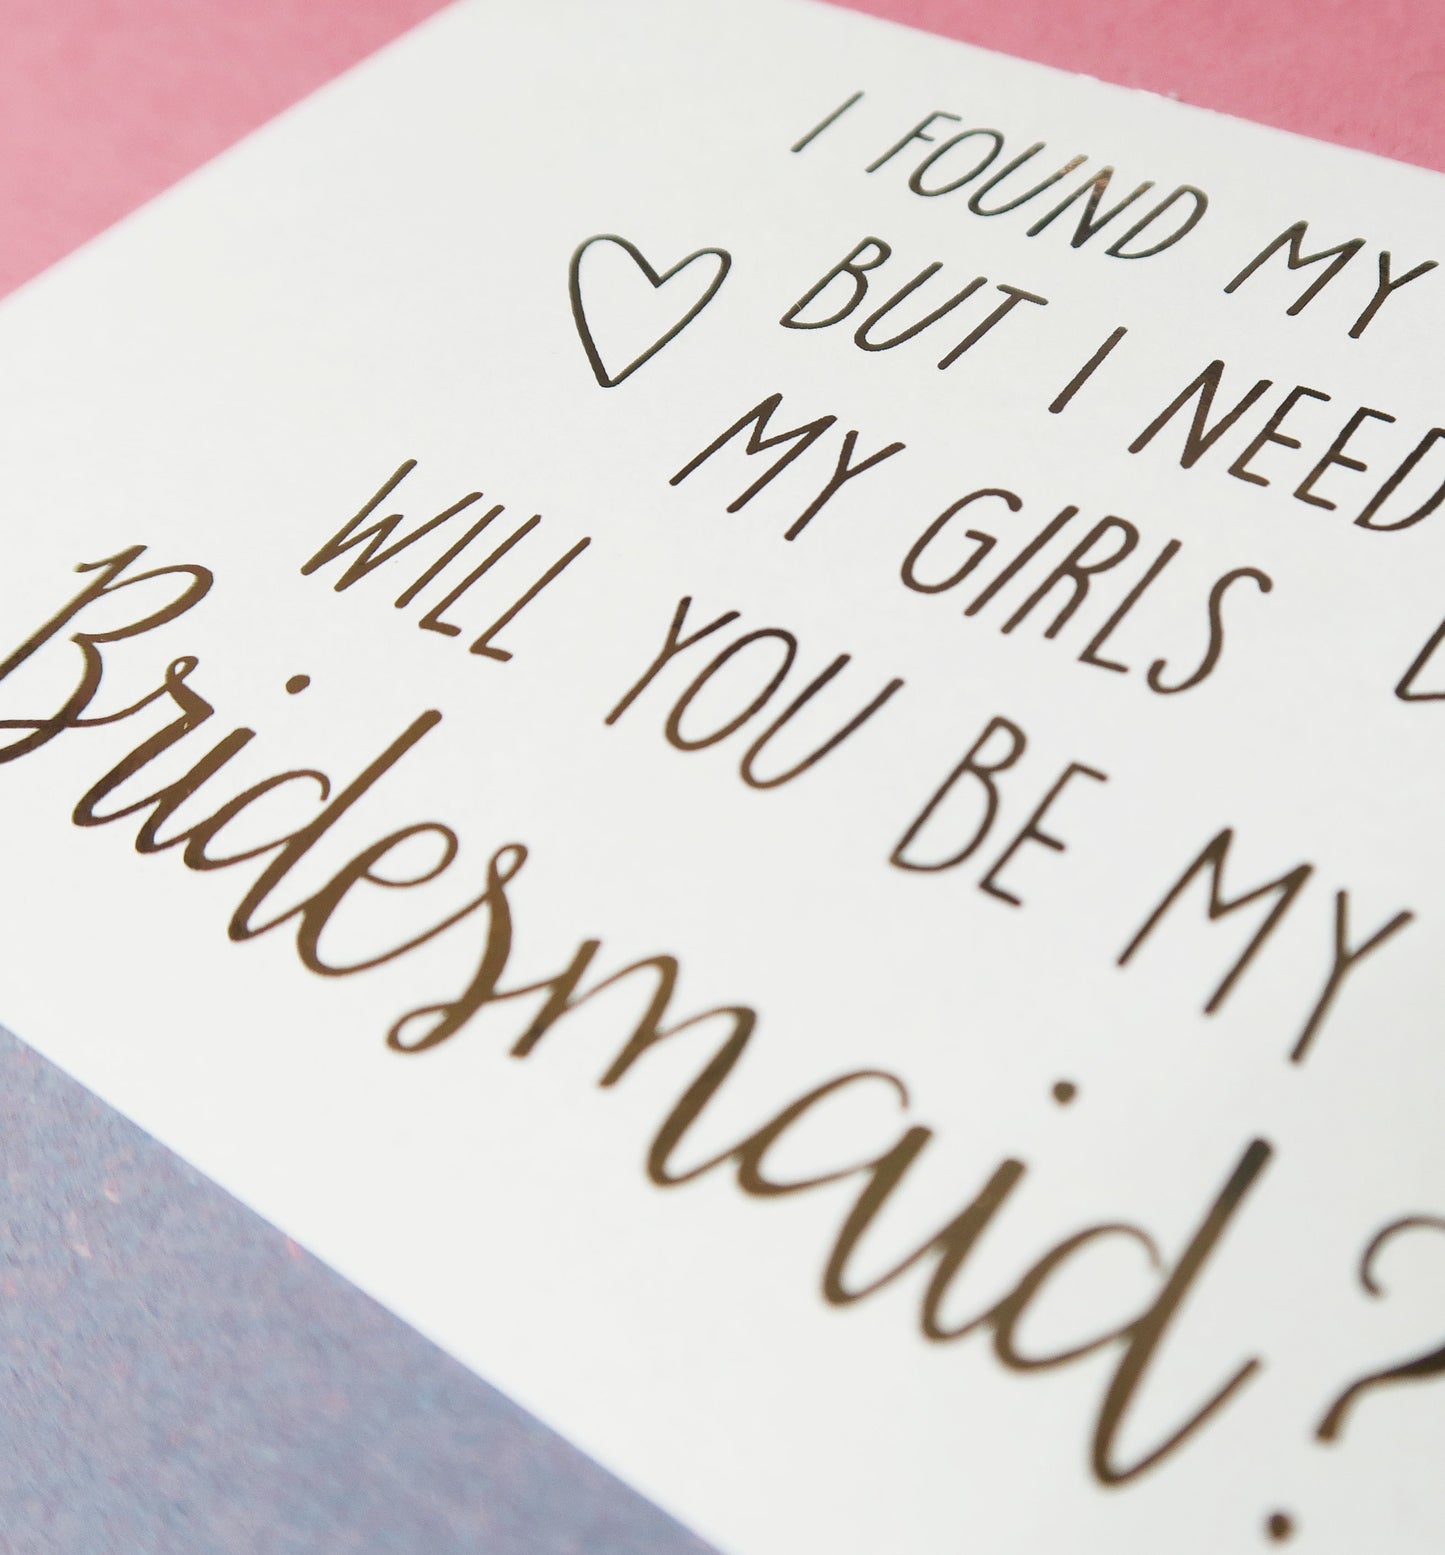 Mum thanks for giving me the weird bit of your personality  | Foiled print / greeting card